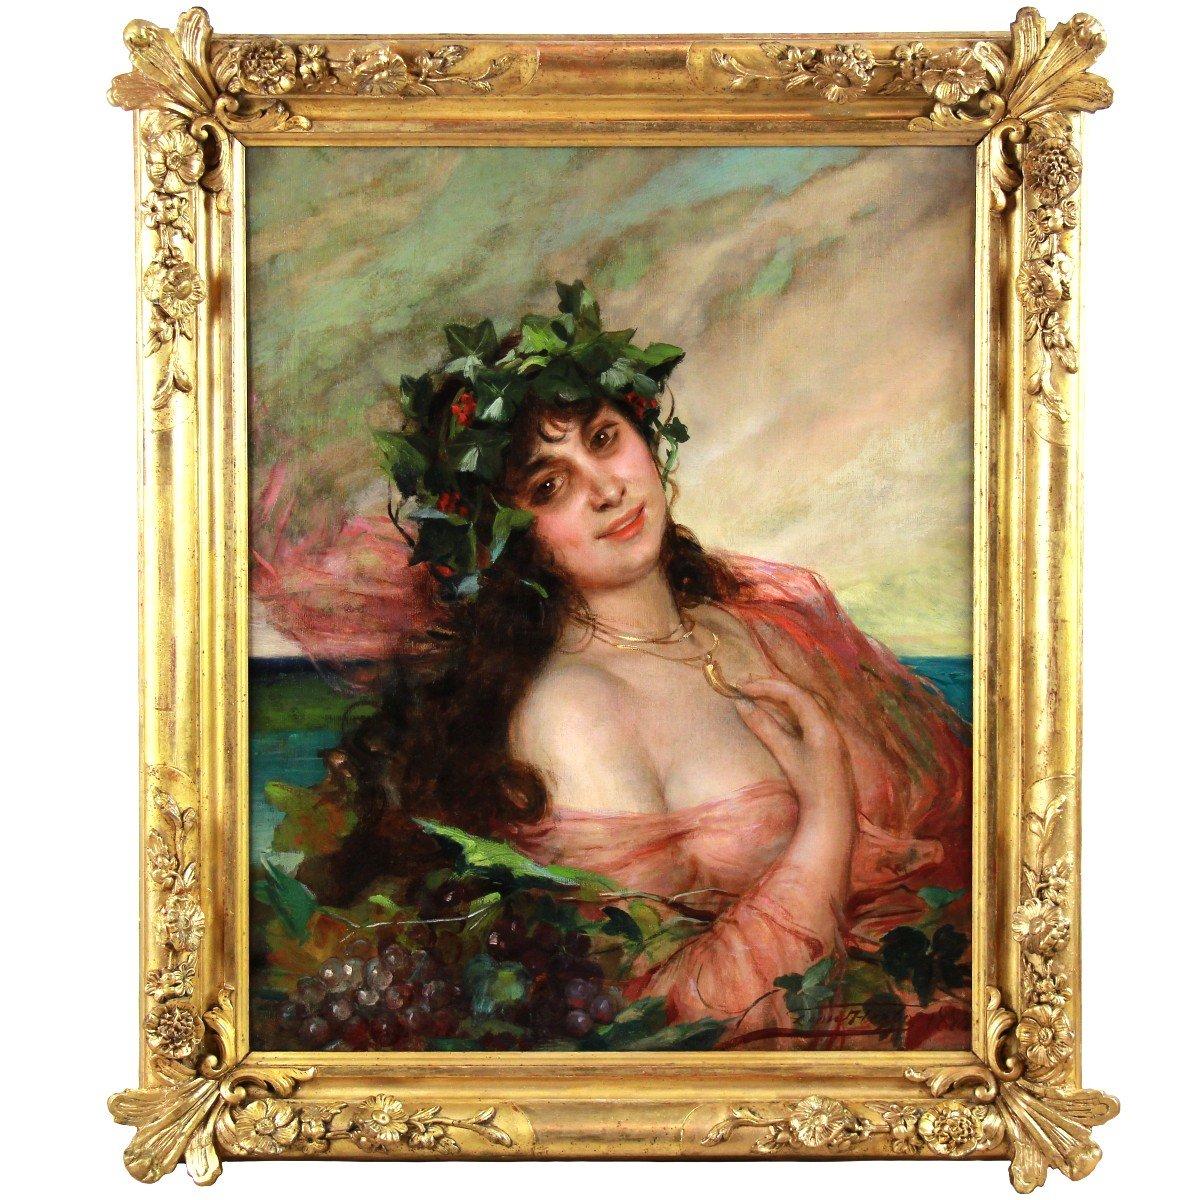 Oil On Canvas, Nude "La Bacchante" dated 1885 and signed by Léon Herbo